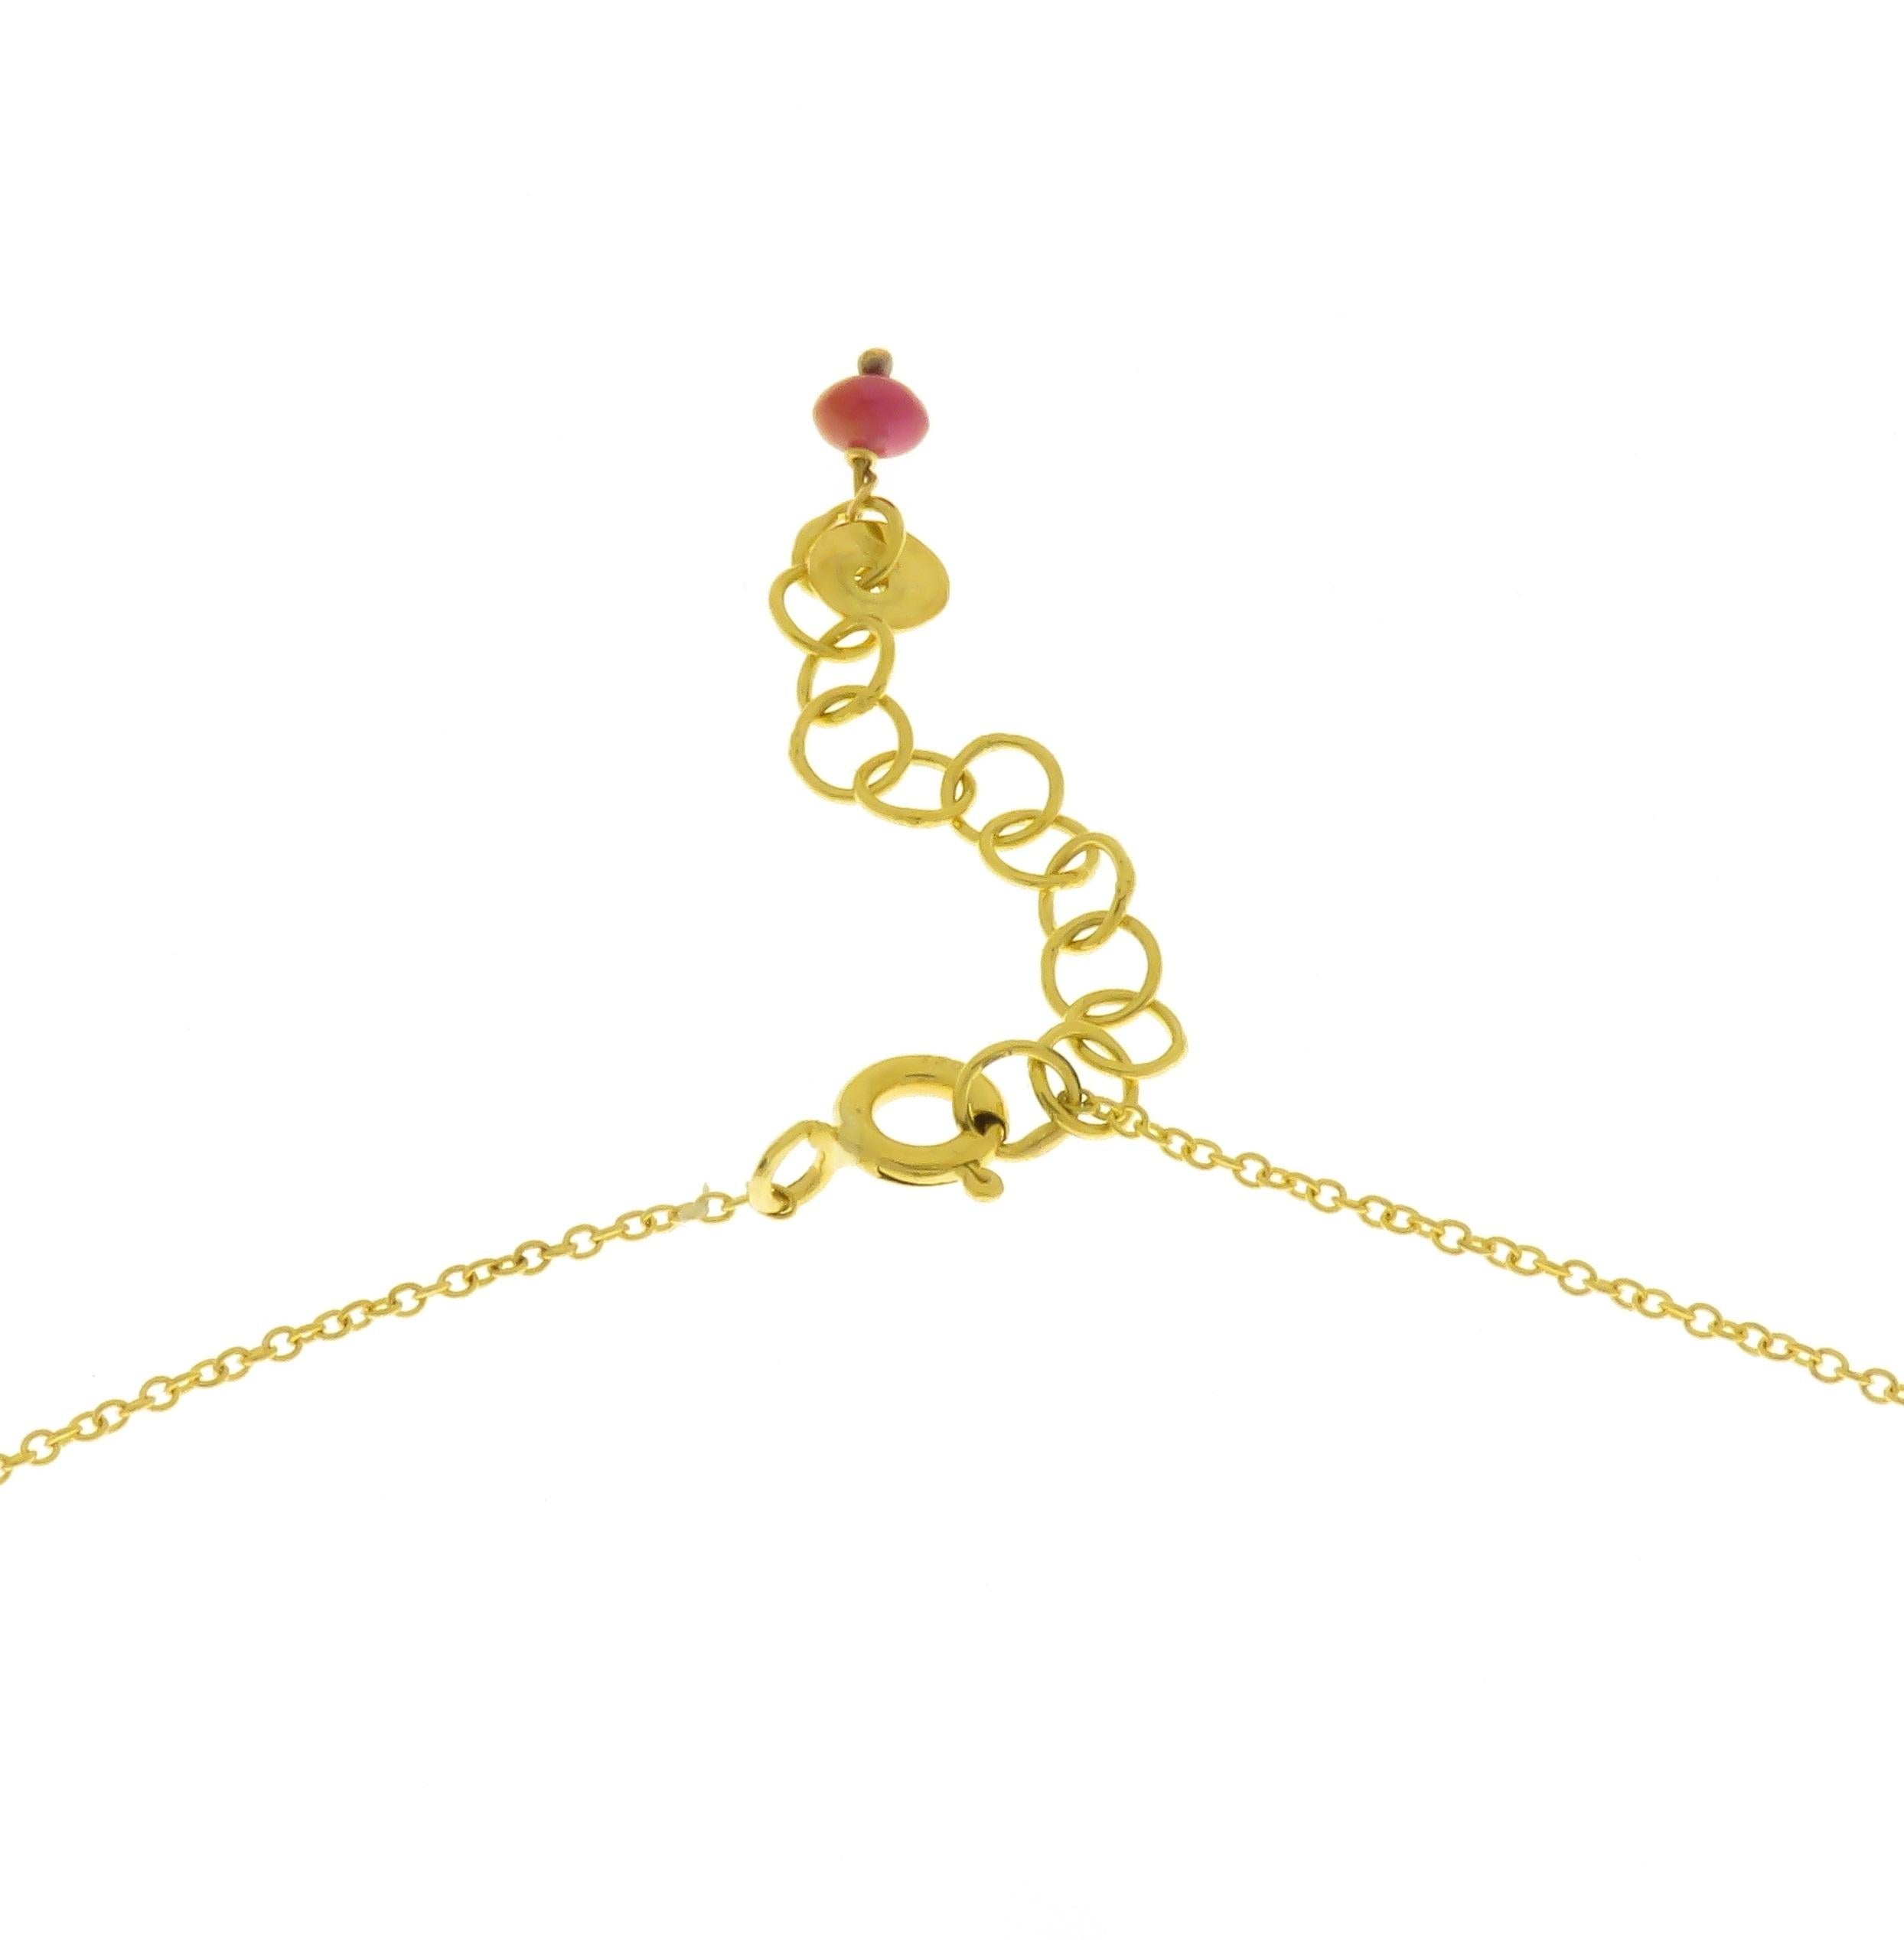 Brilliant Cut Rubies Diamonds 18 Karat Yellow Gold Necklace Handcrafted in Italy For Sale